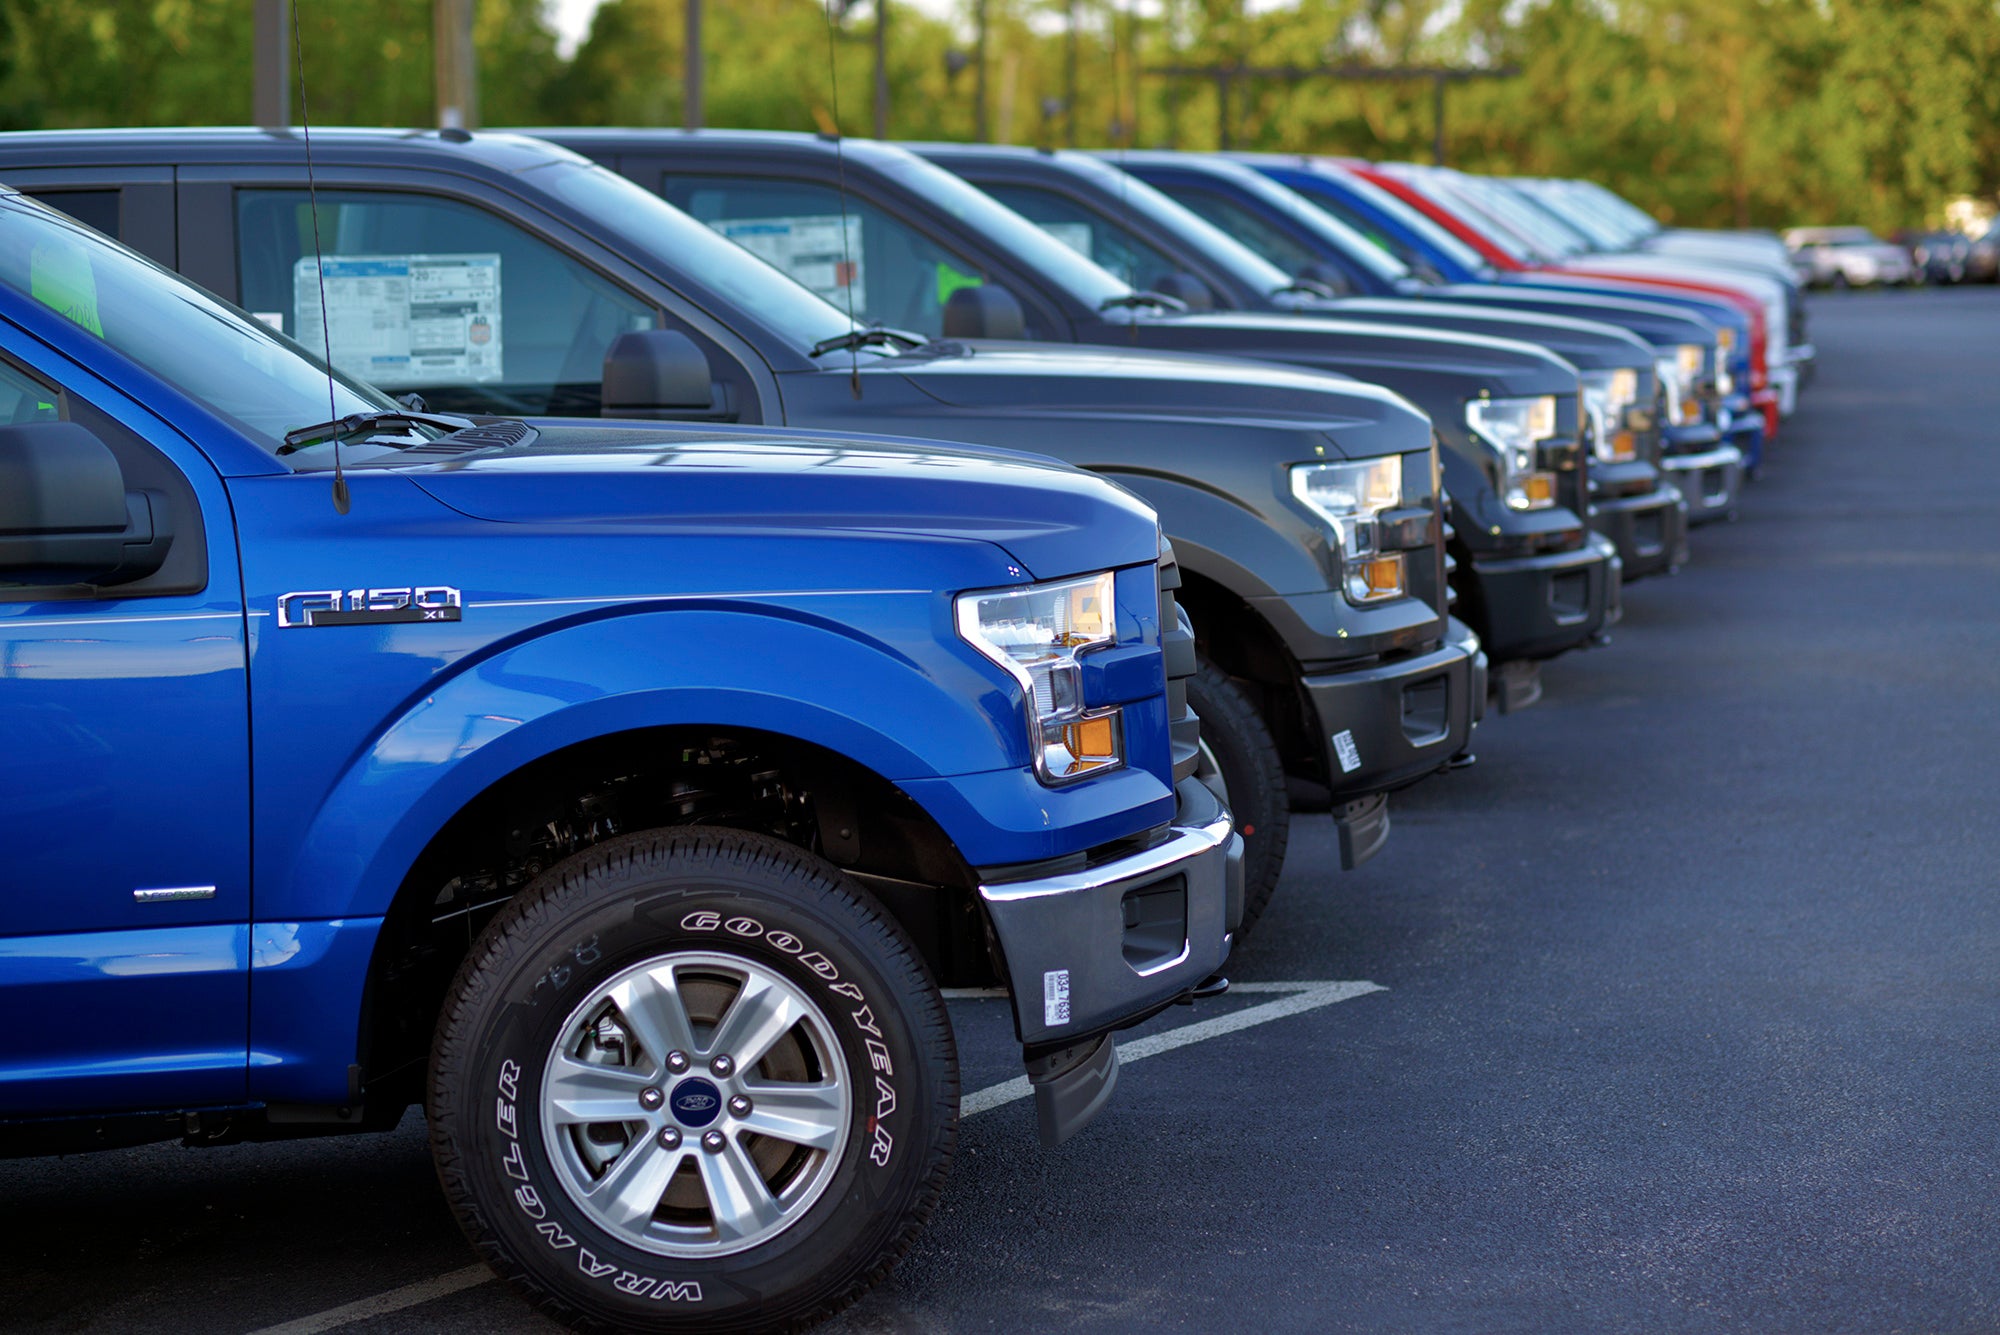 Schedule a test drive at Duncan Ford Lincoln in Blacksburg, VA.